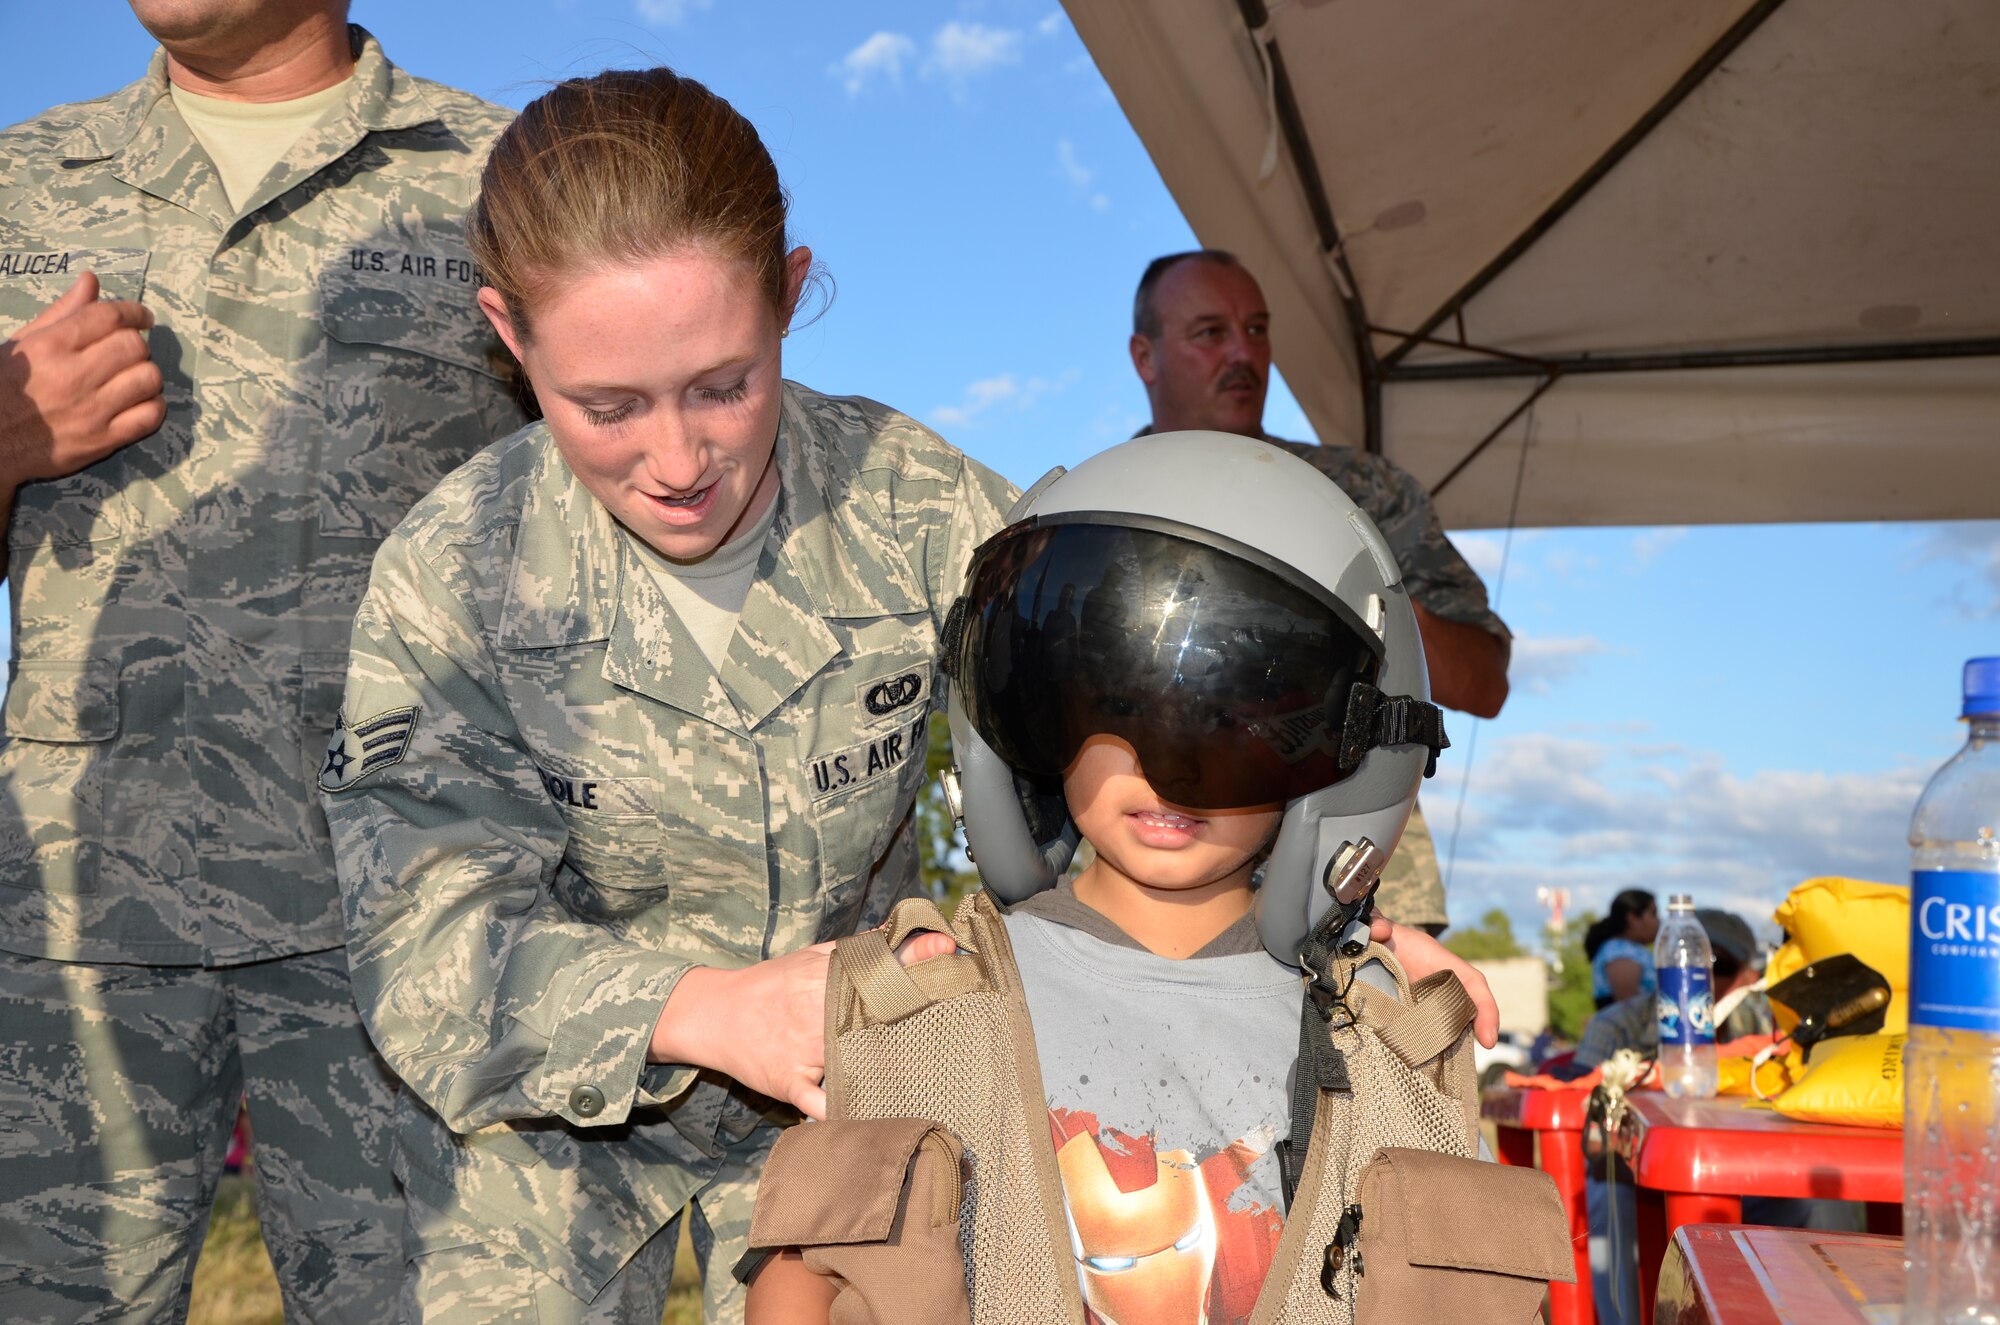 U.S. Air Force Senior Airman Beverly Cole assists a Salvadoran child wearing an aircrew flight helmet and vest at the 2013 Ilopango Air Show in Ilopango, El Salvador as part of a community relations event for the State Partnership Program January 26, 2013.  (N.H. National Guard photo by 1st Lt. Aaron McCarthy/RELEASED)